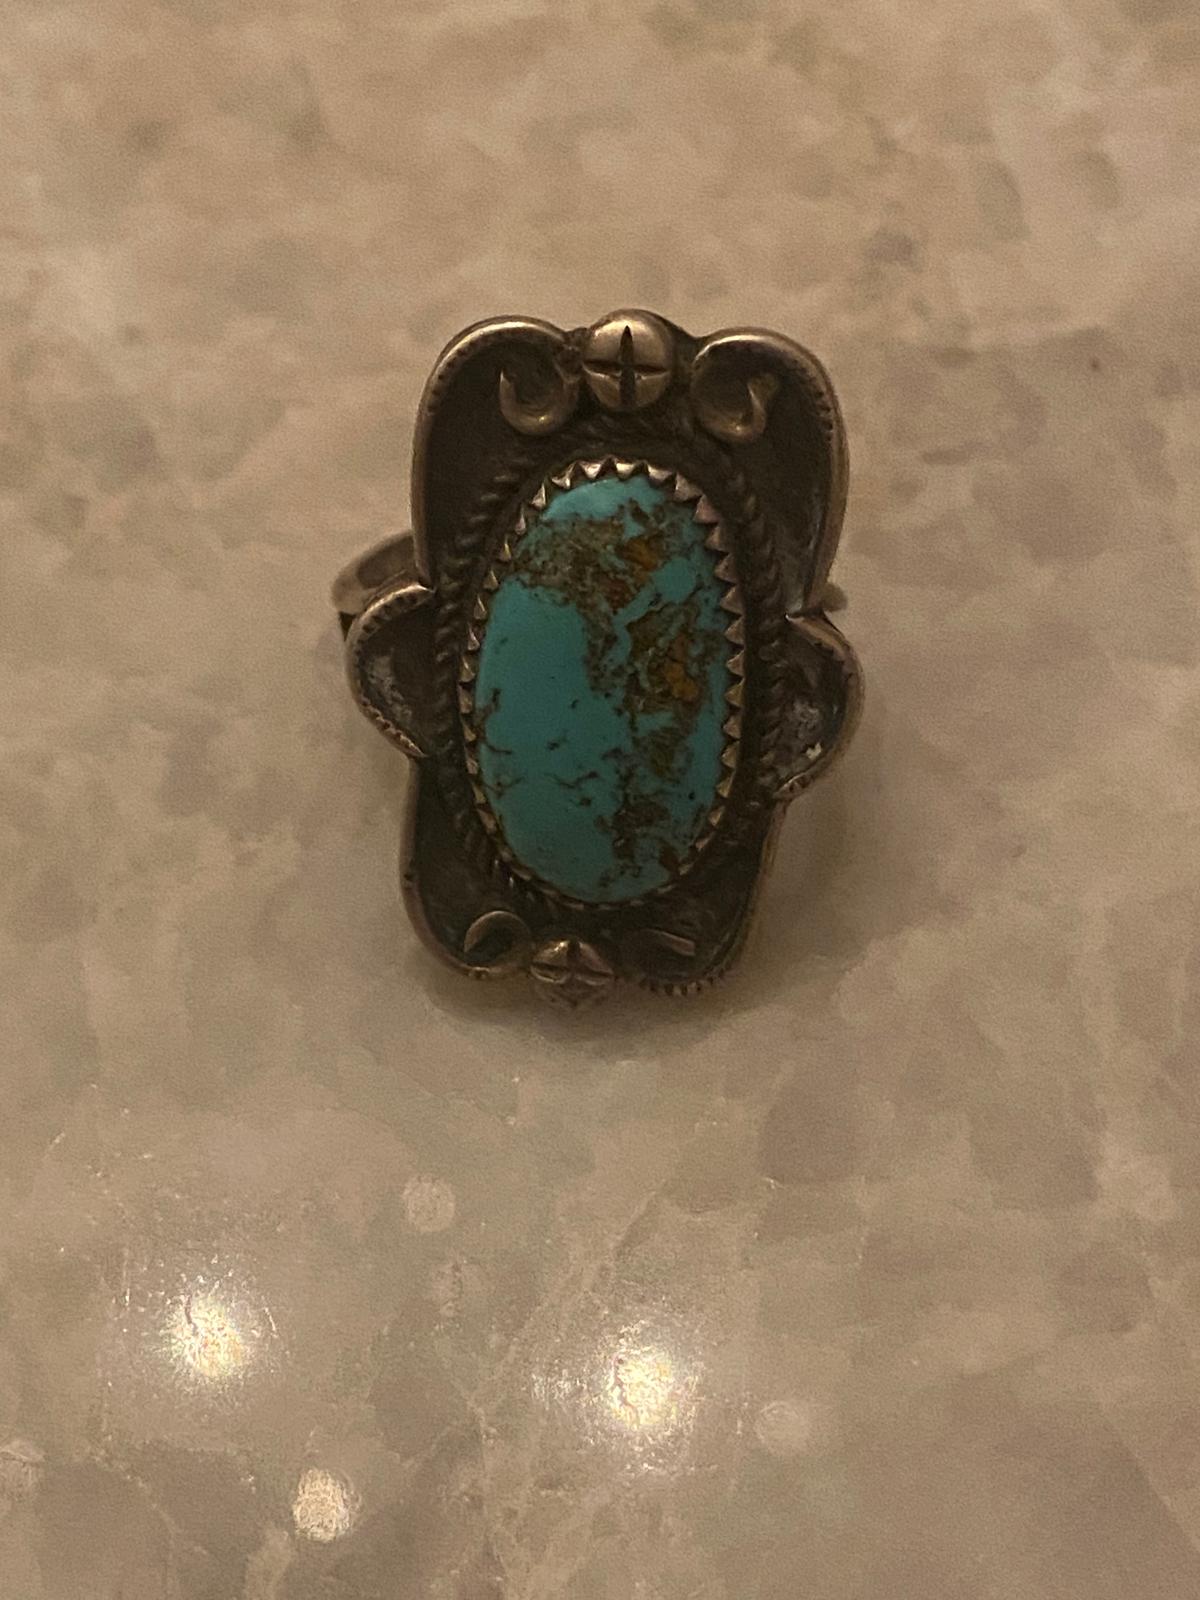 An ornate ring found in the manor. (Courtesy of <a href="https://www.facebook.com/profile.php?id=100076974185503">Krasnesky Manor for Wayward Cats</a>)